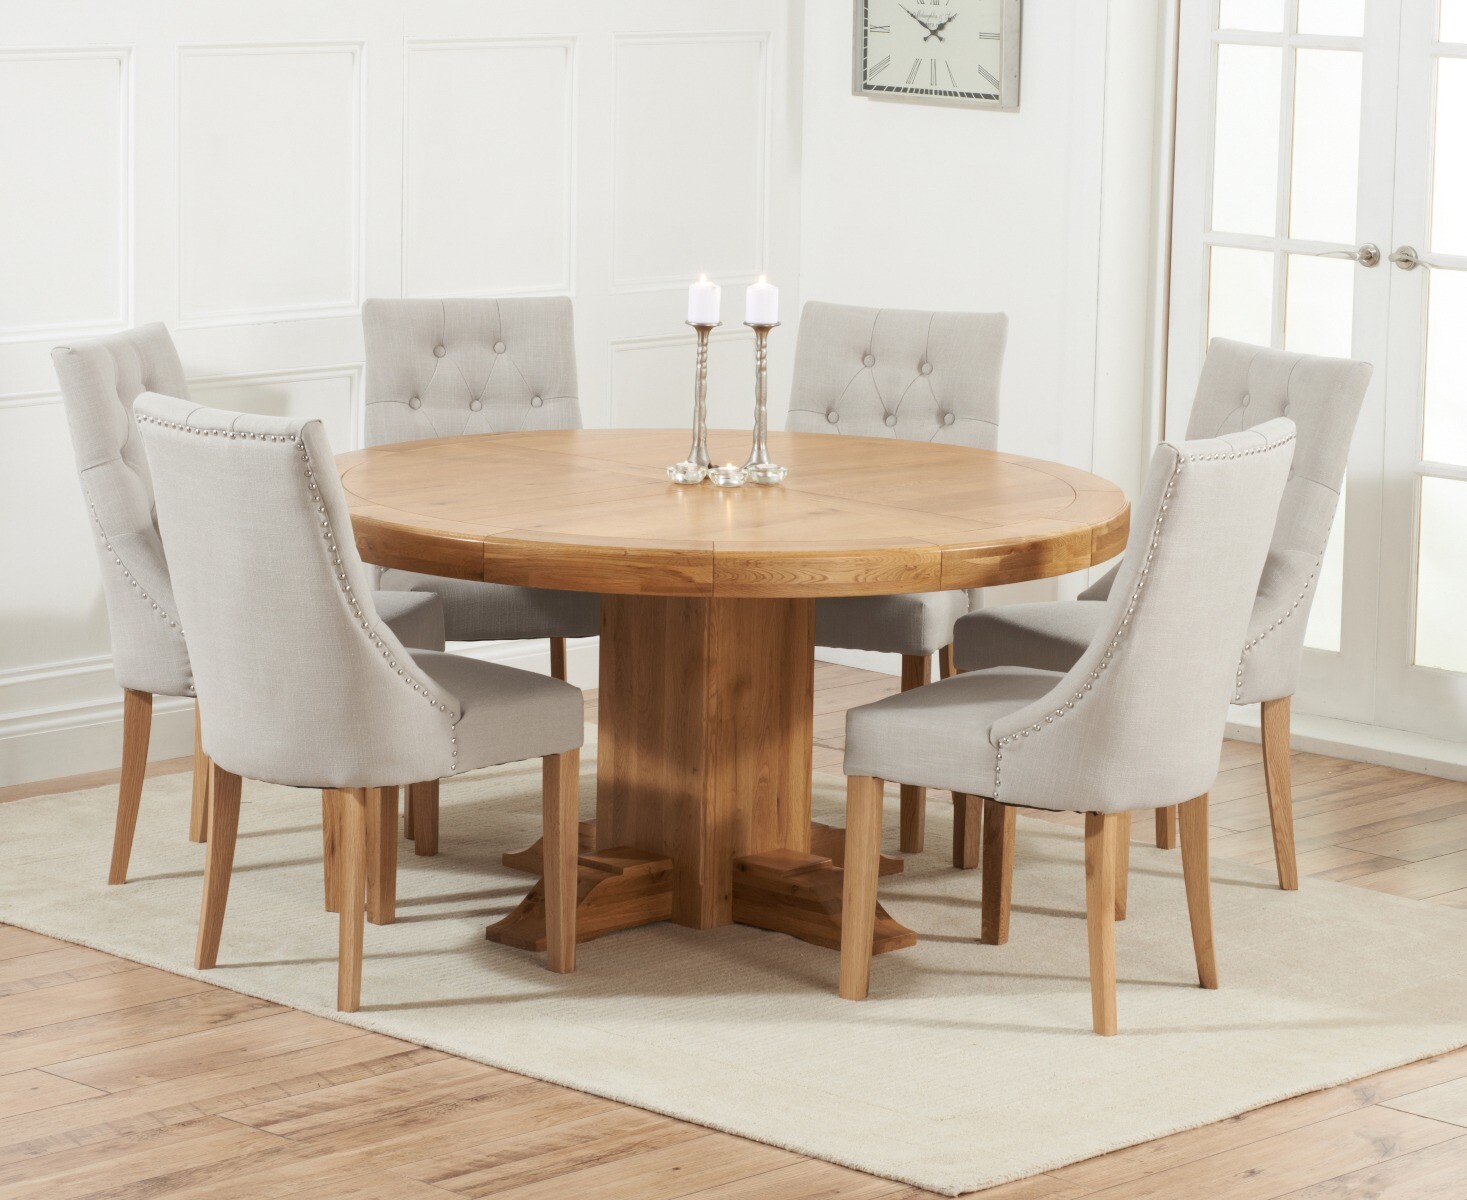 Helmsley 150cm Solid Oak Round Pedestal Dining Table With 6 Natural Beatrix Fabric Chairs